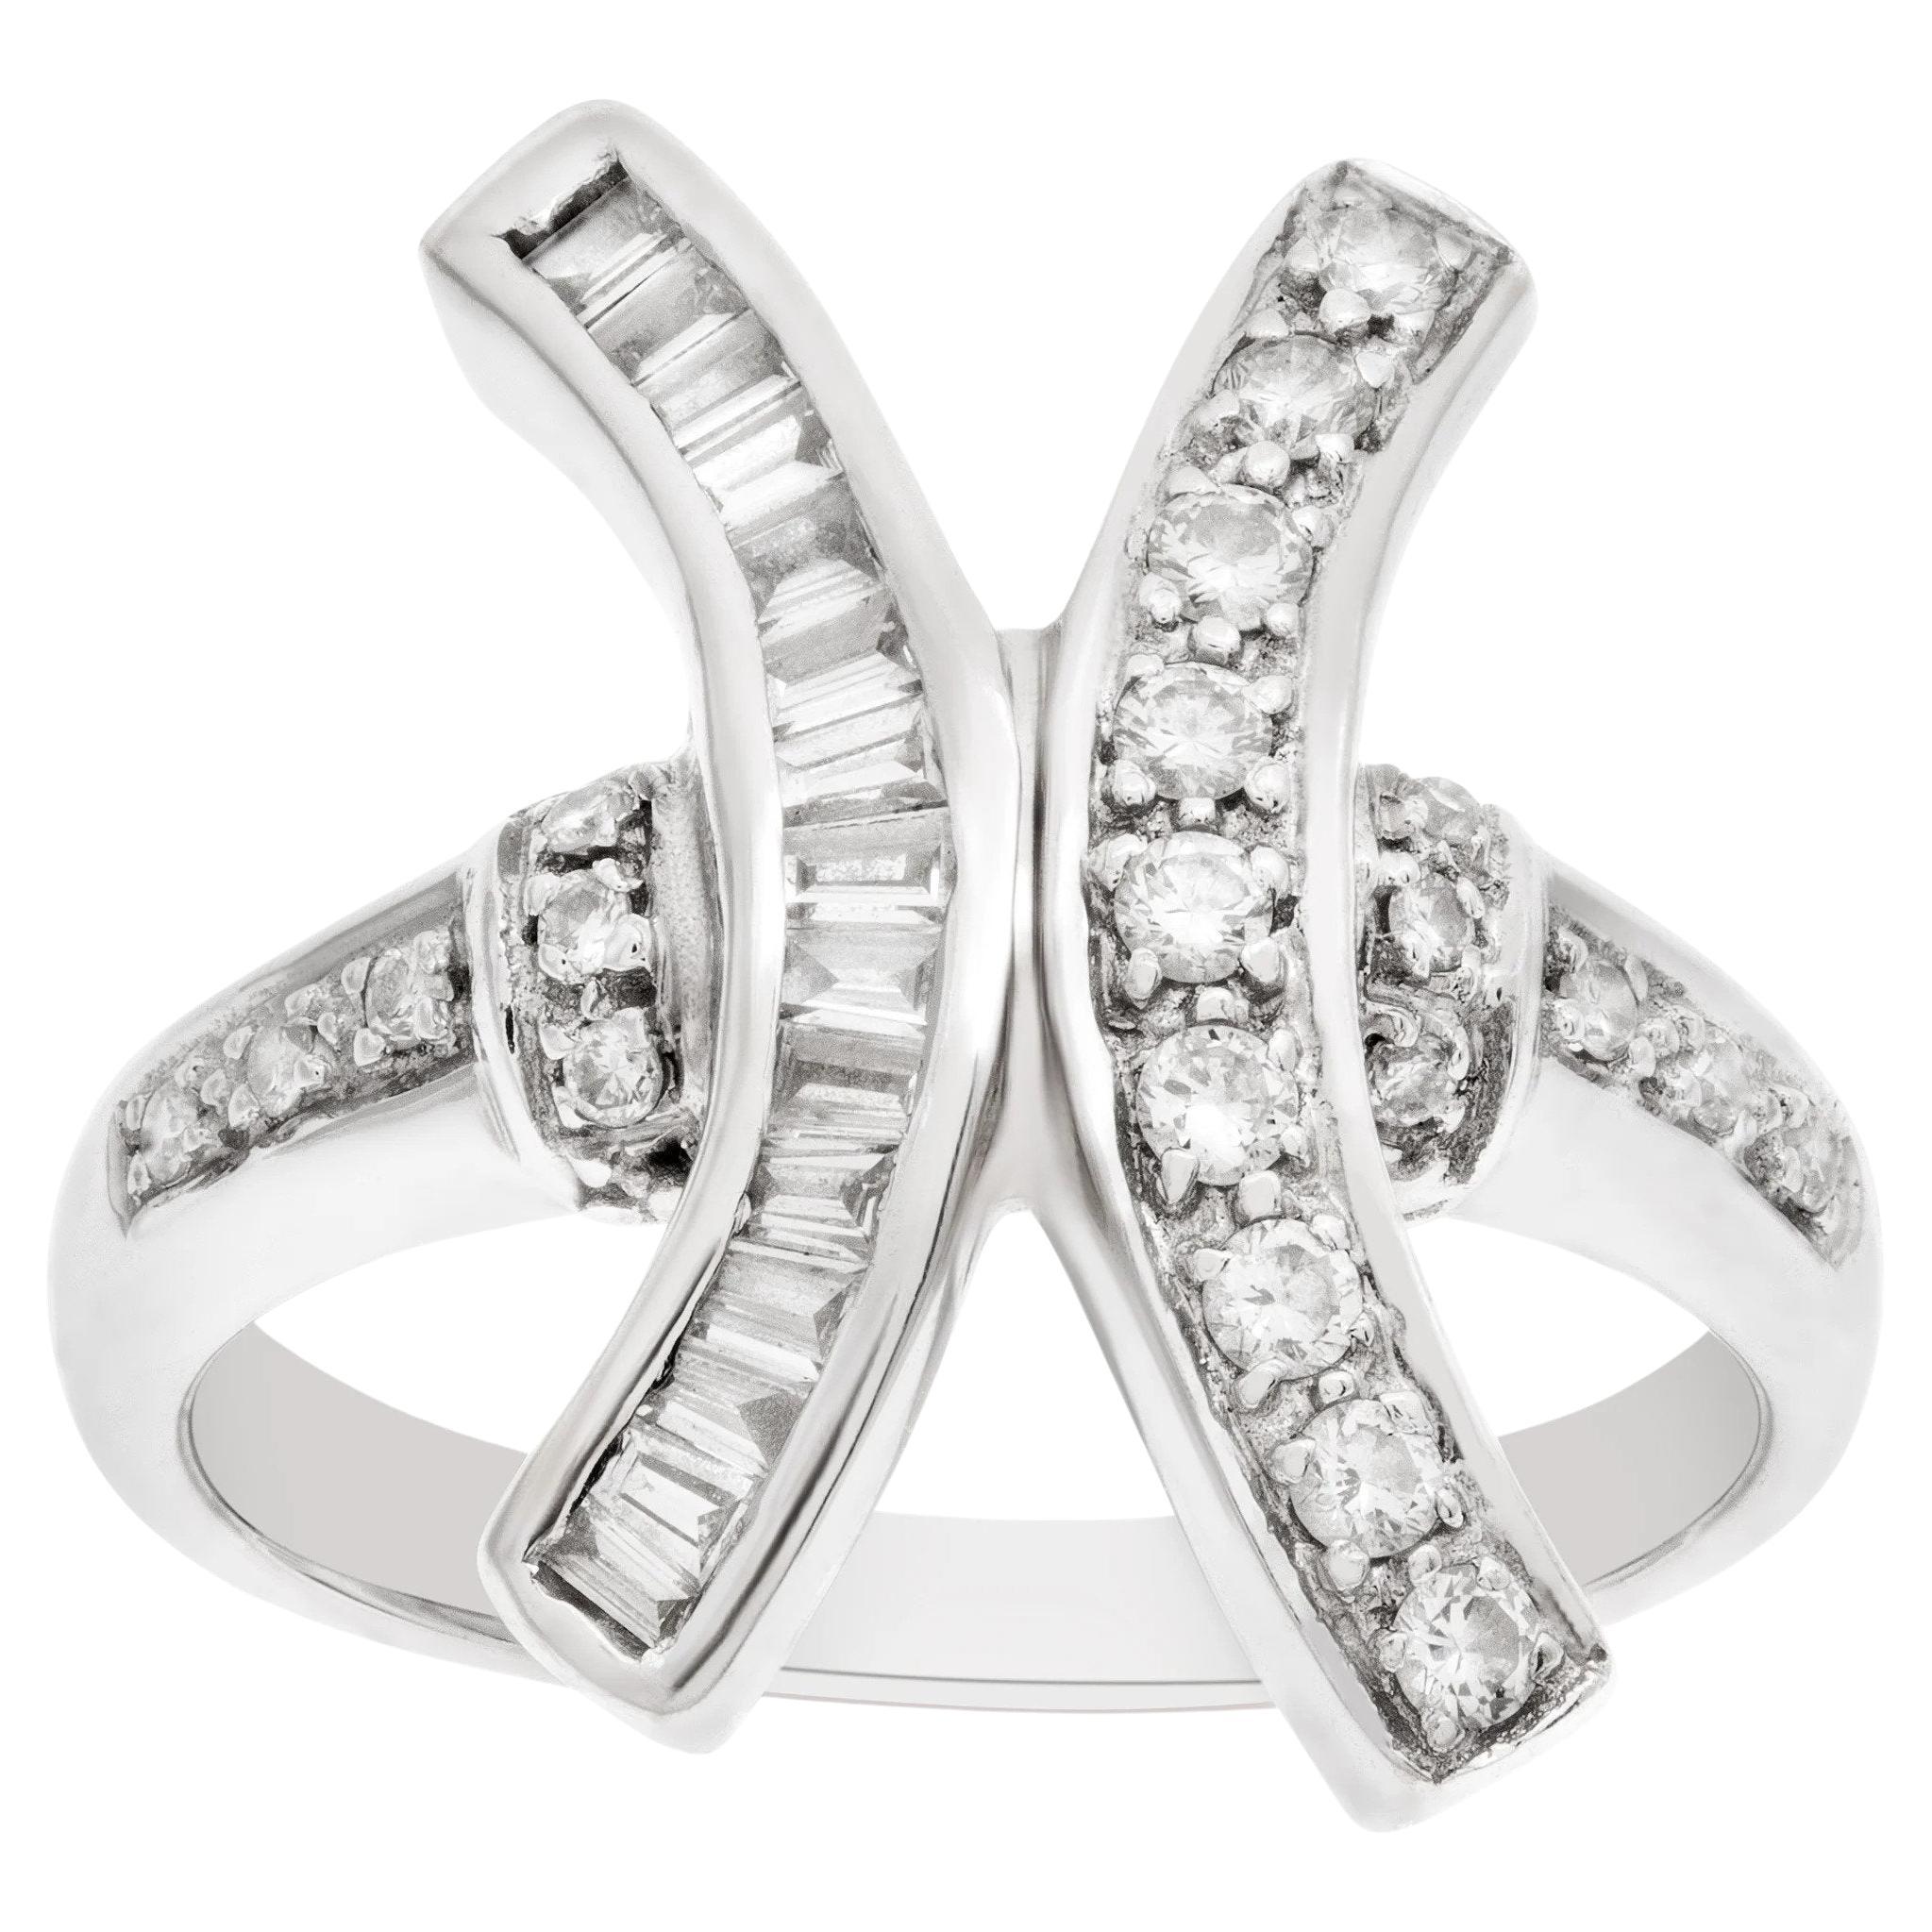 X Shaped Diamond Ring in 18k White Gold, 0.30 Carats in Diamonds For Sale